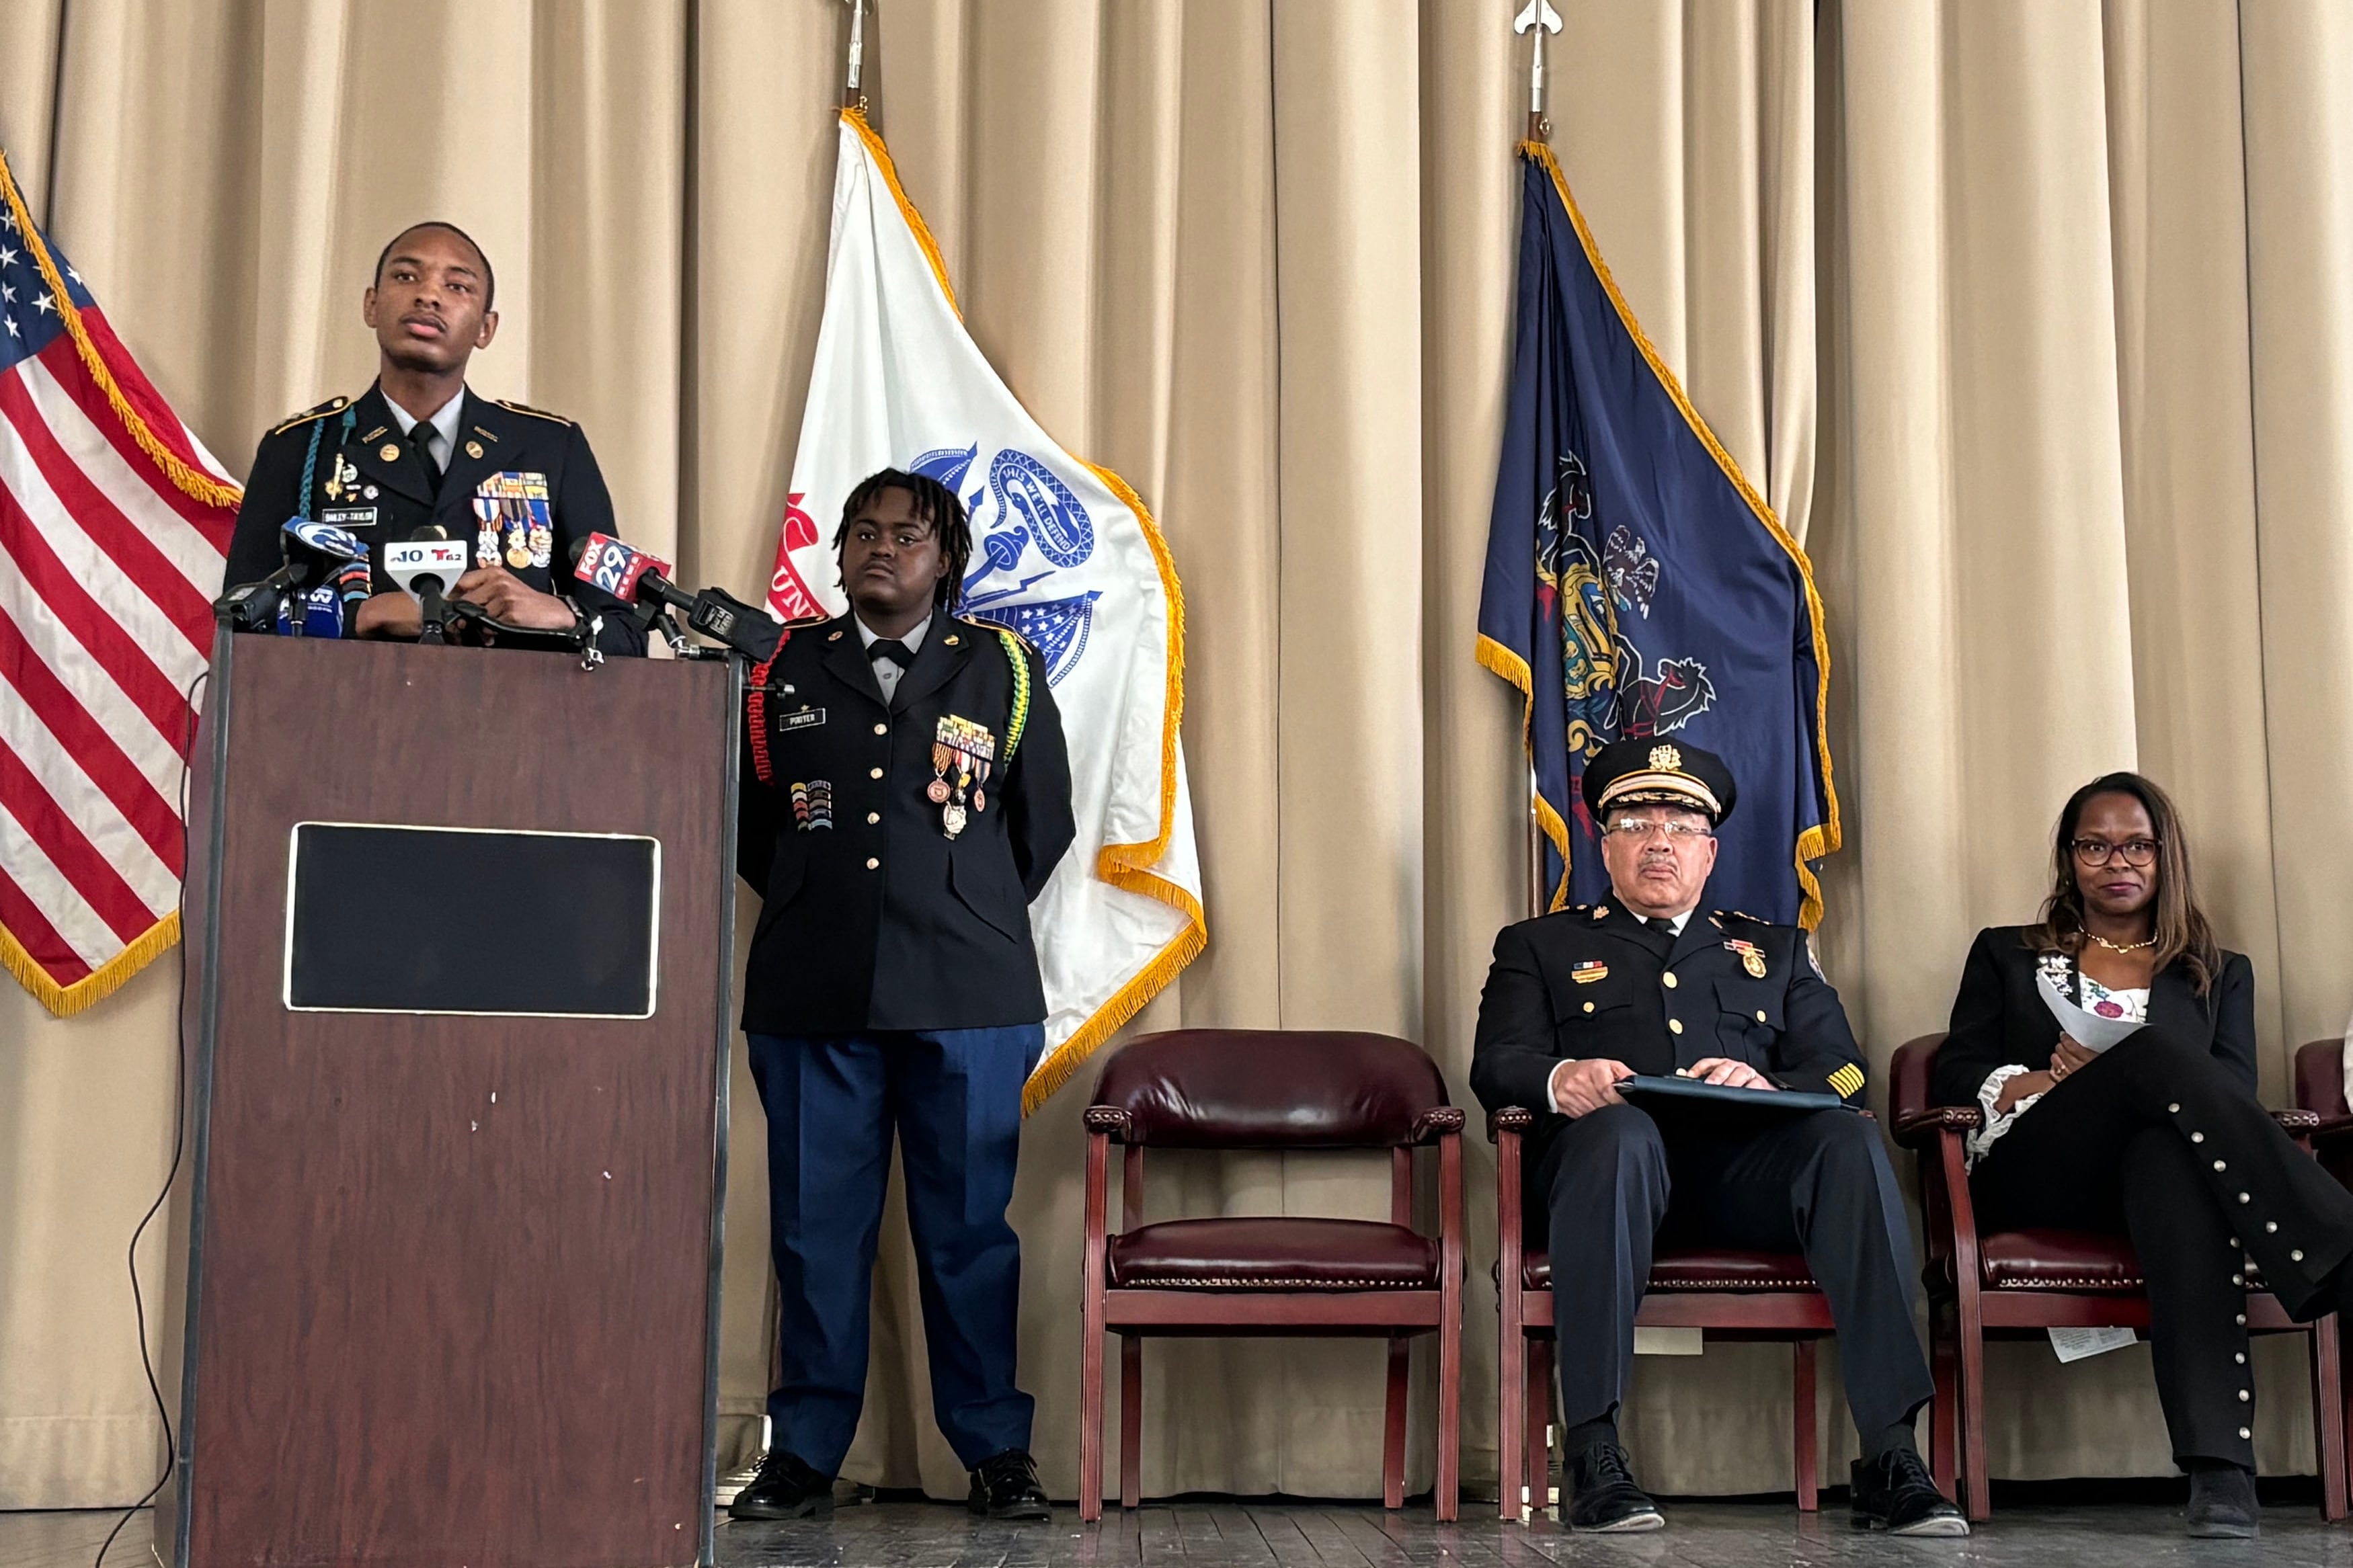 Two students wearing military like uniforms stand on the left of the frame behind a wooden podium while two adults sit in chairs on the right of the frame with three flags in the background.